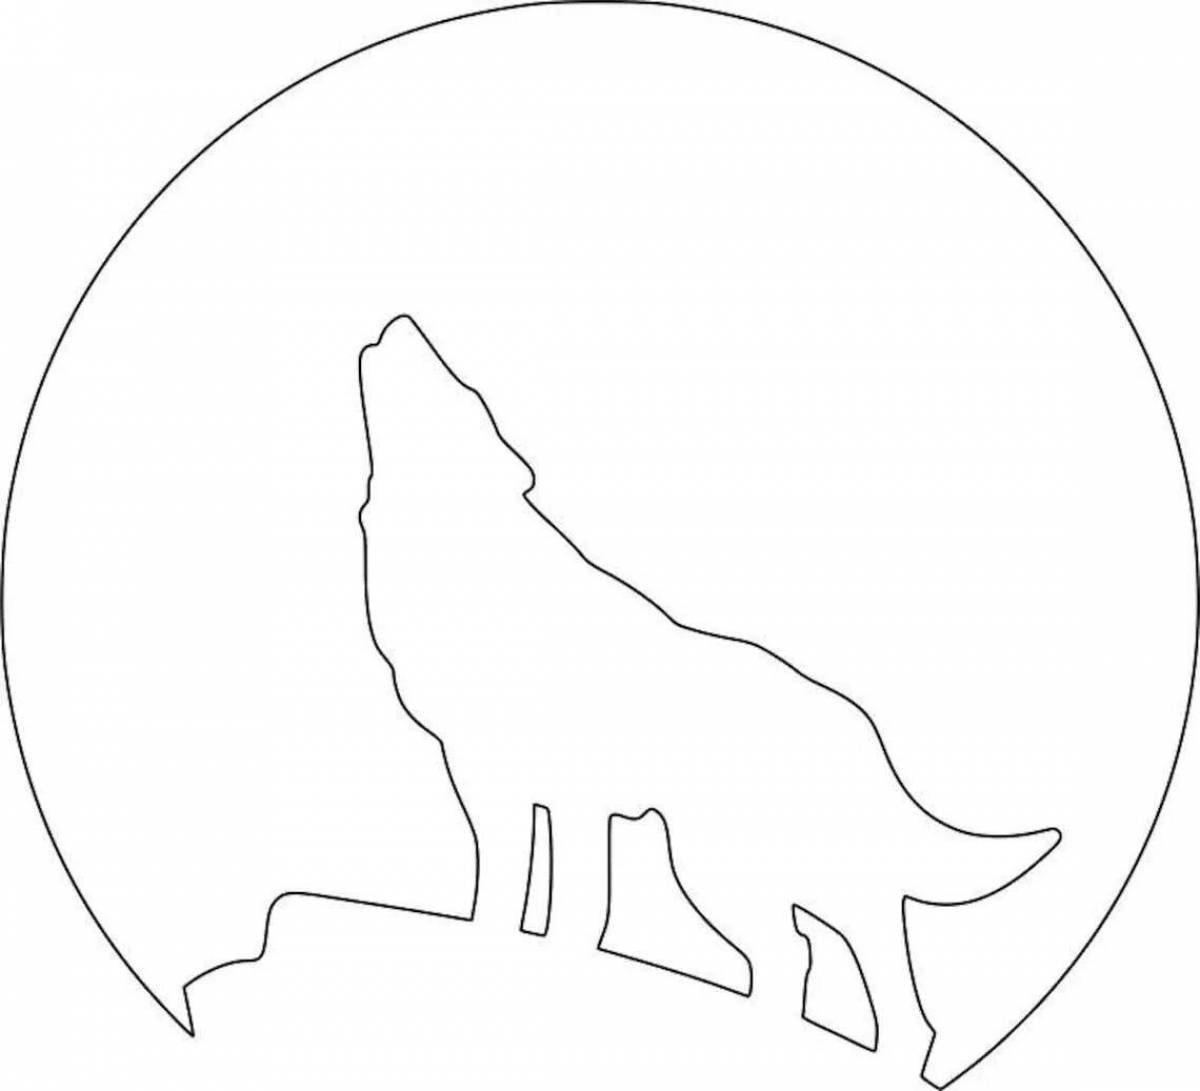 Coloring page bright wolf howling at the moon